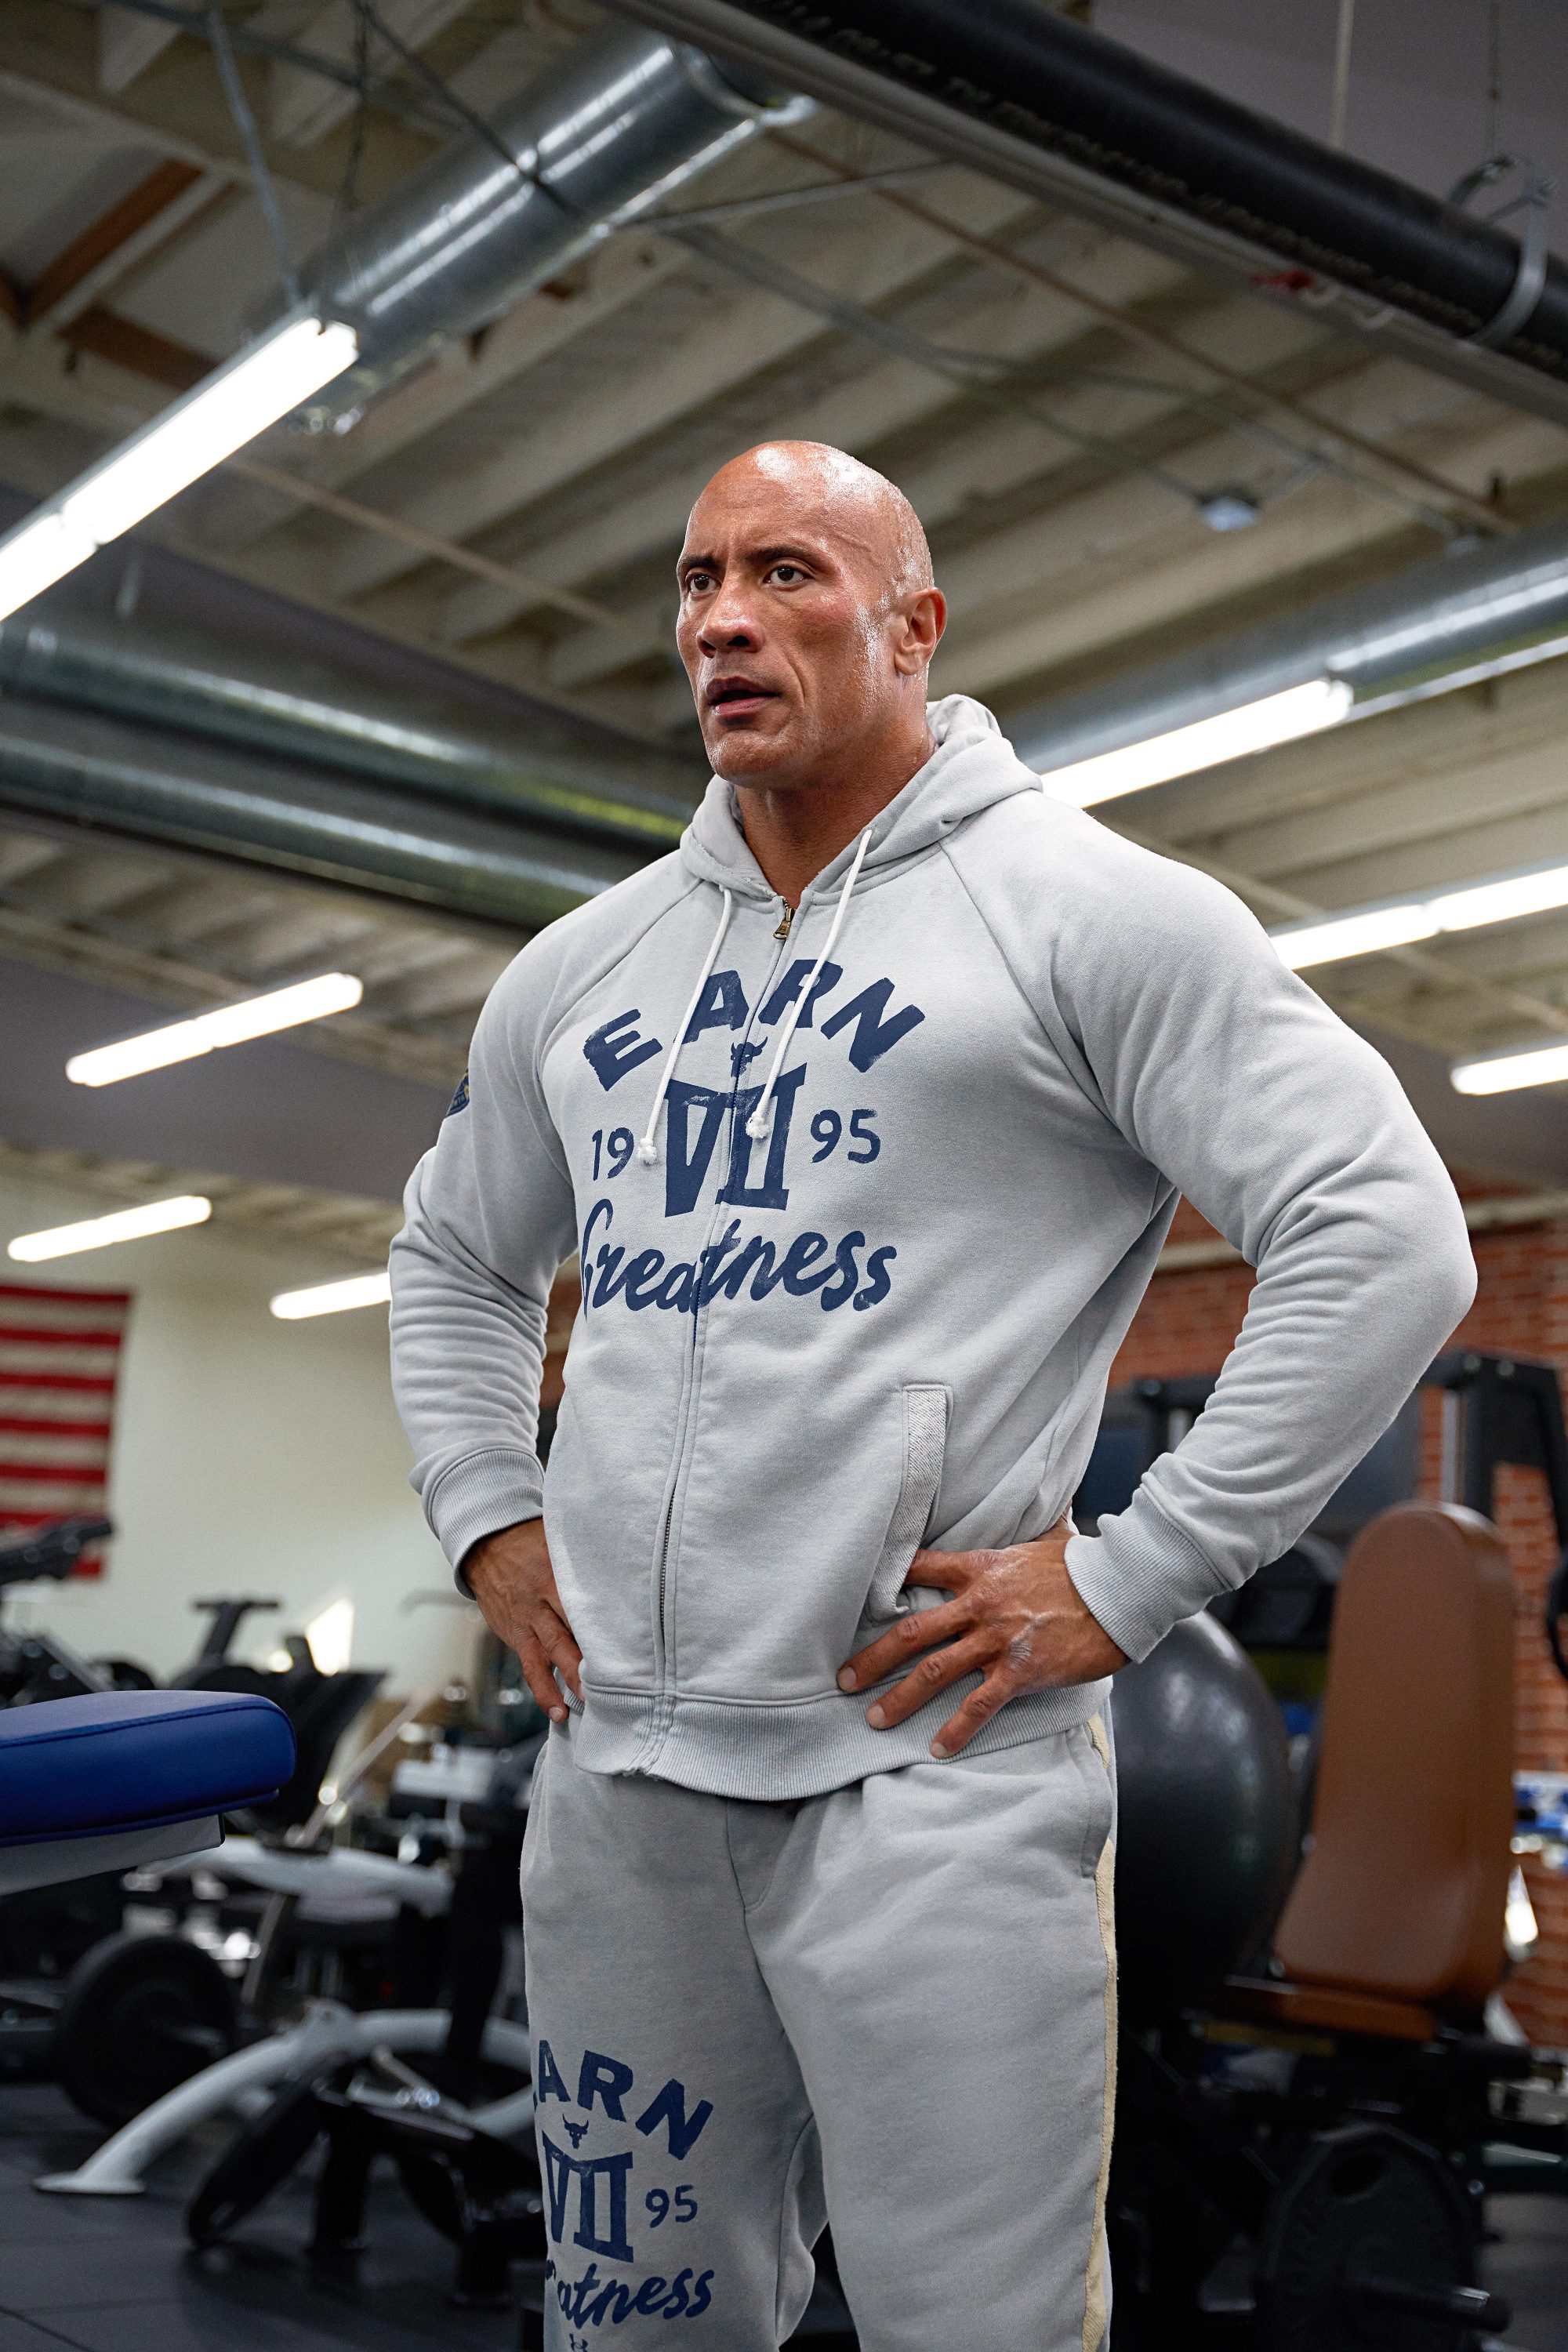 Ontvangst Stamboom Christian Leverage your workout with The Rock-approved Under Armour collection